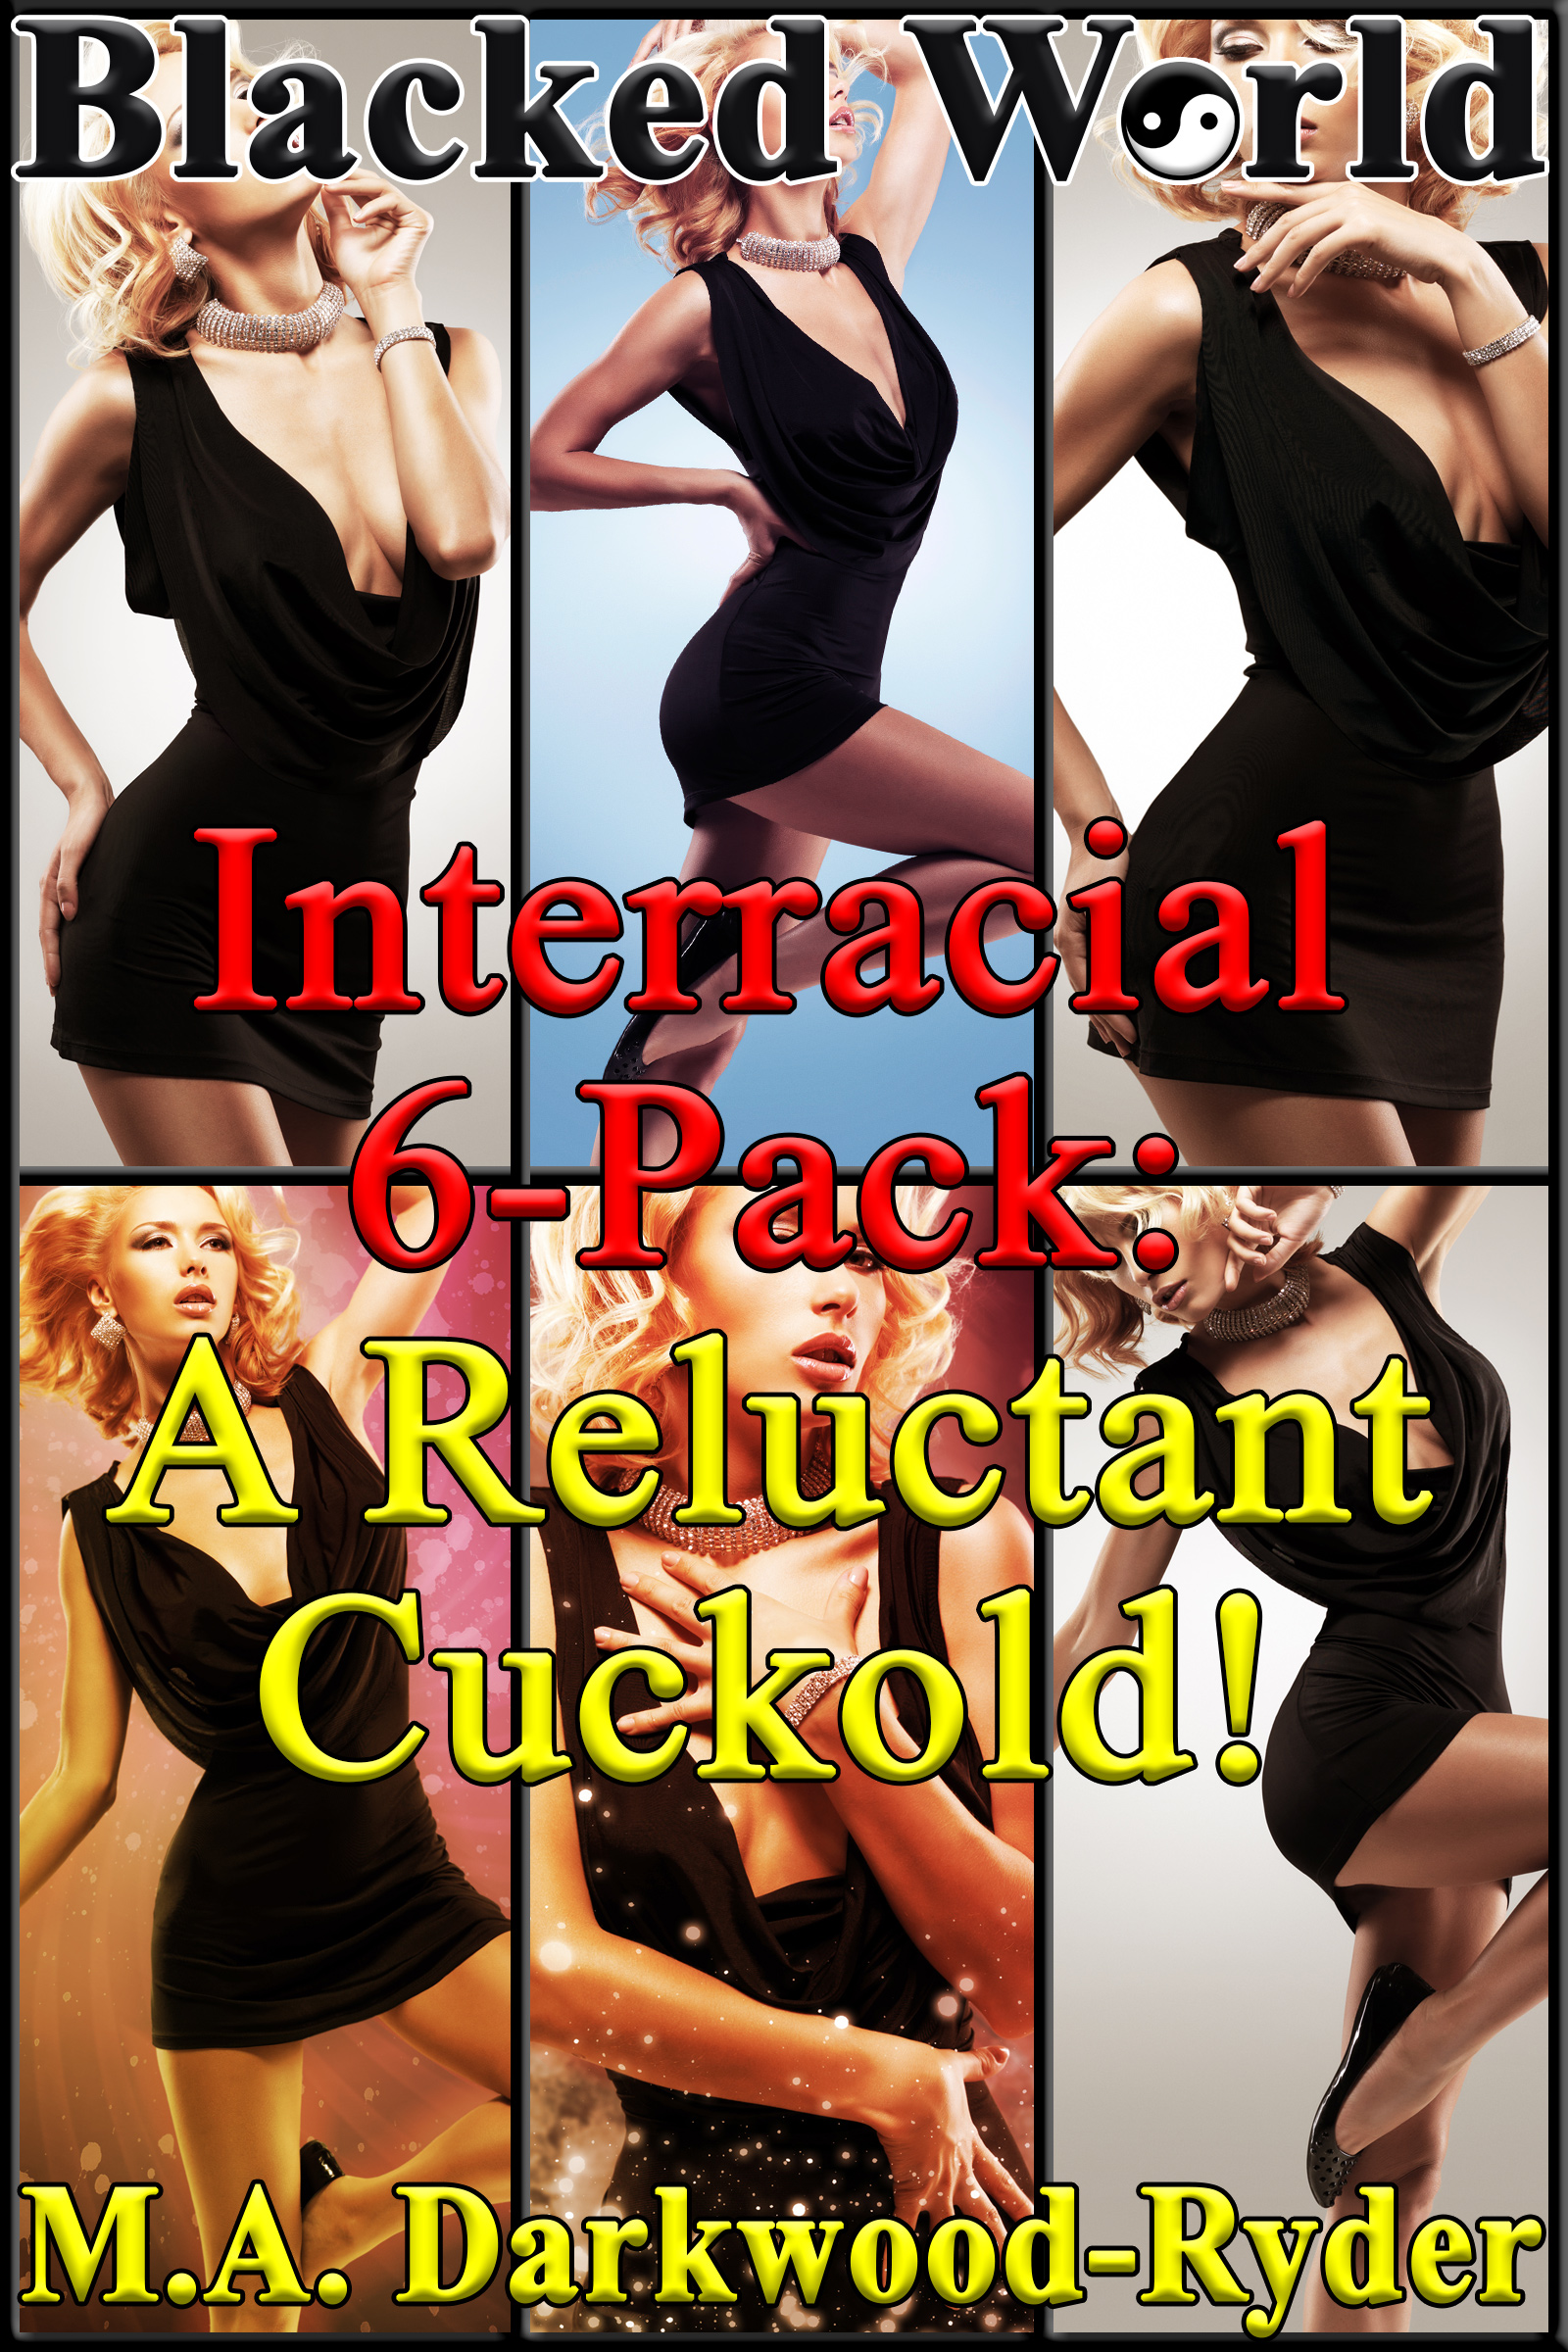 Reluctant Interracial Cuckhold